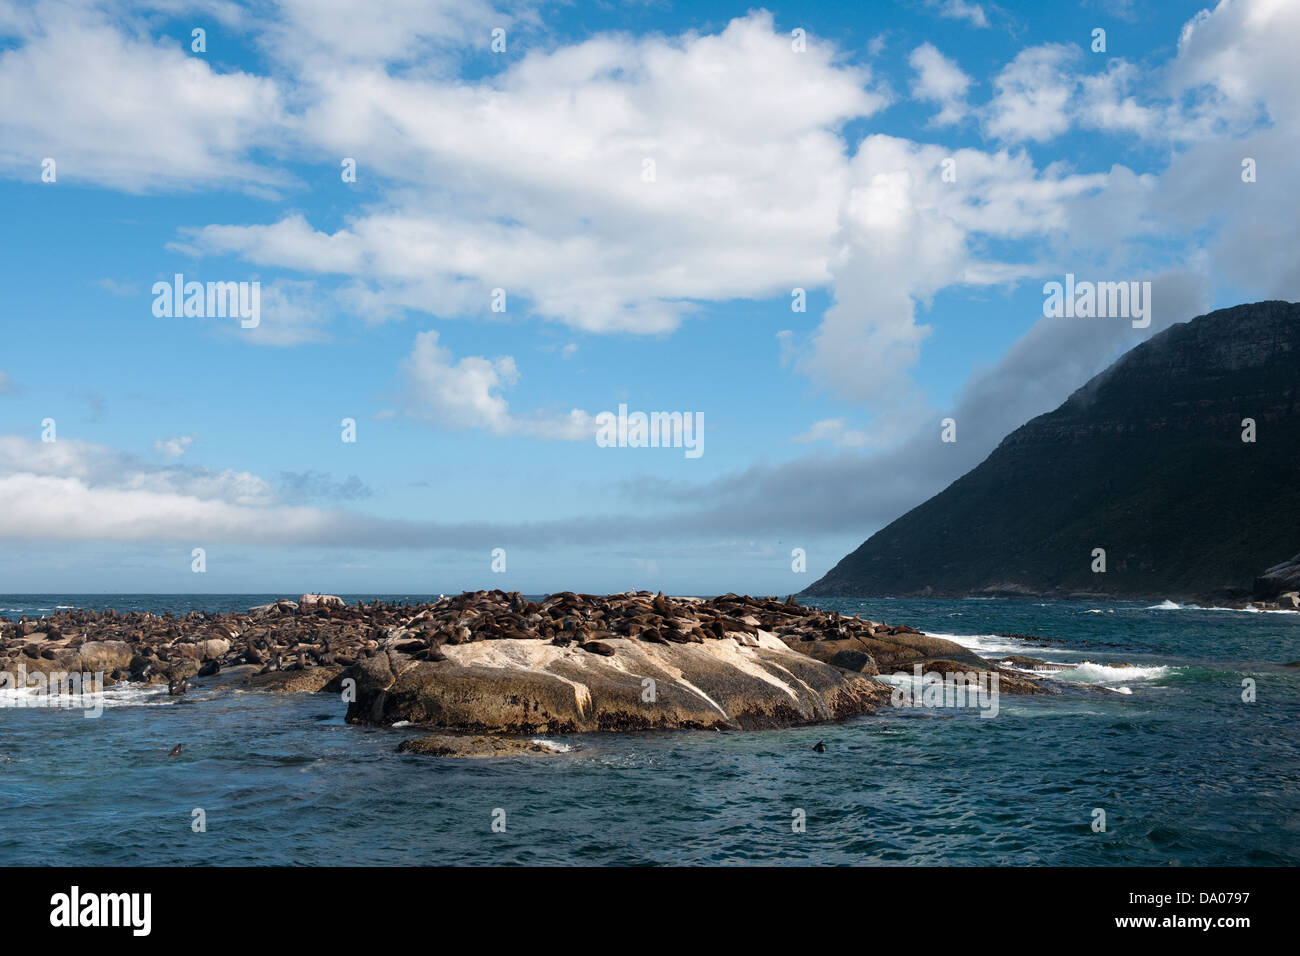 Colony of Cape Fur Seals on duiker Island, Hout Bay, Cape Town, South Africa Stock Photo